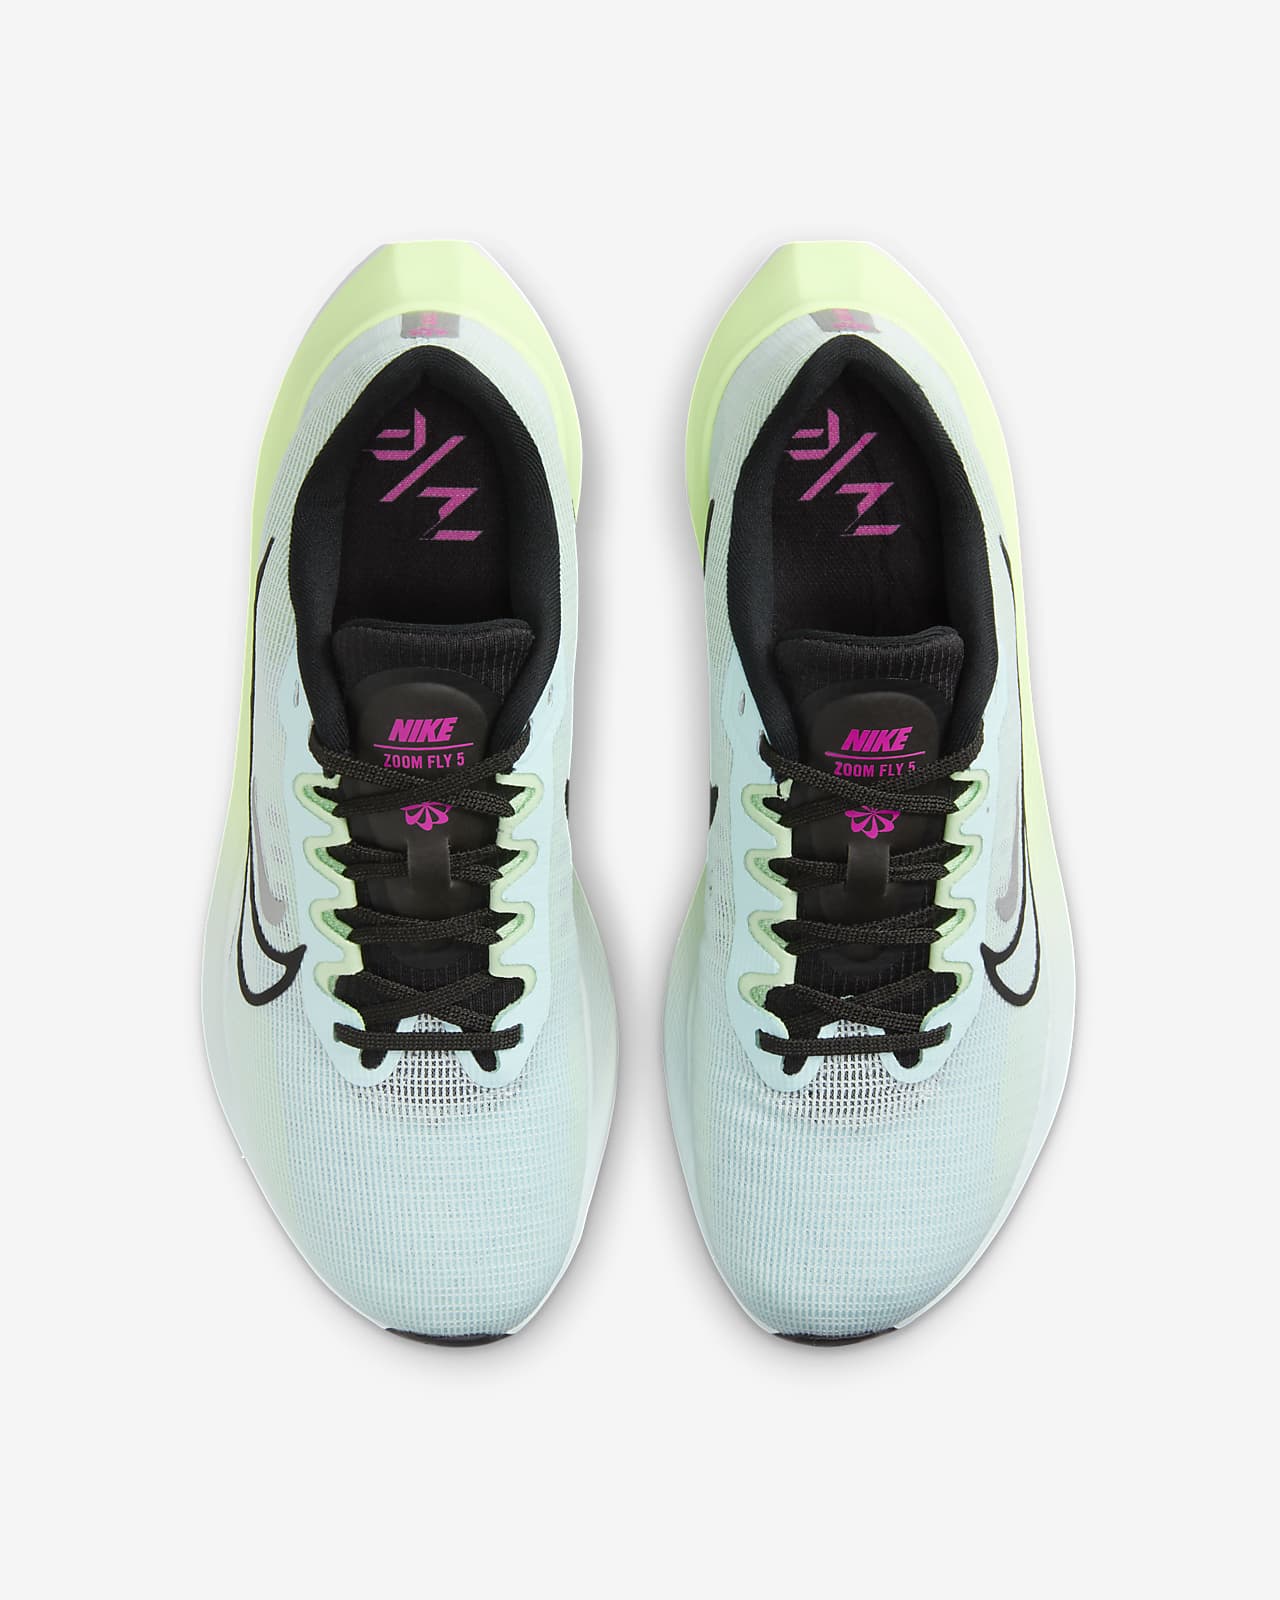 Nike, Women's Zoom Fly 5 Running Shoes - Hyper Pink